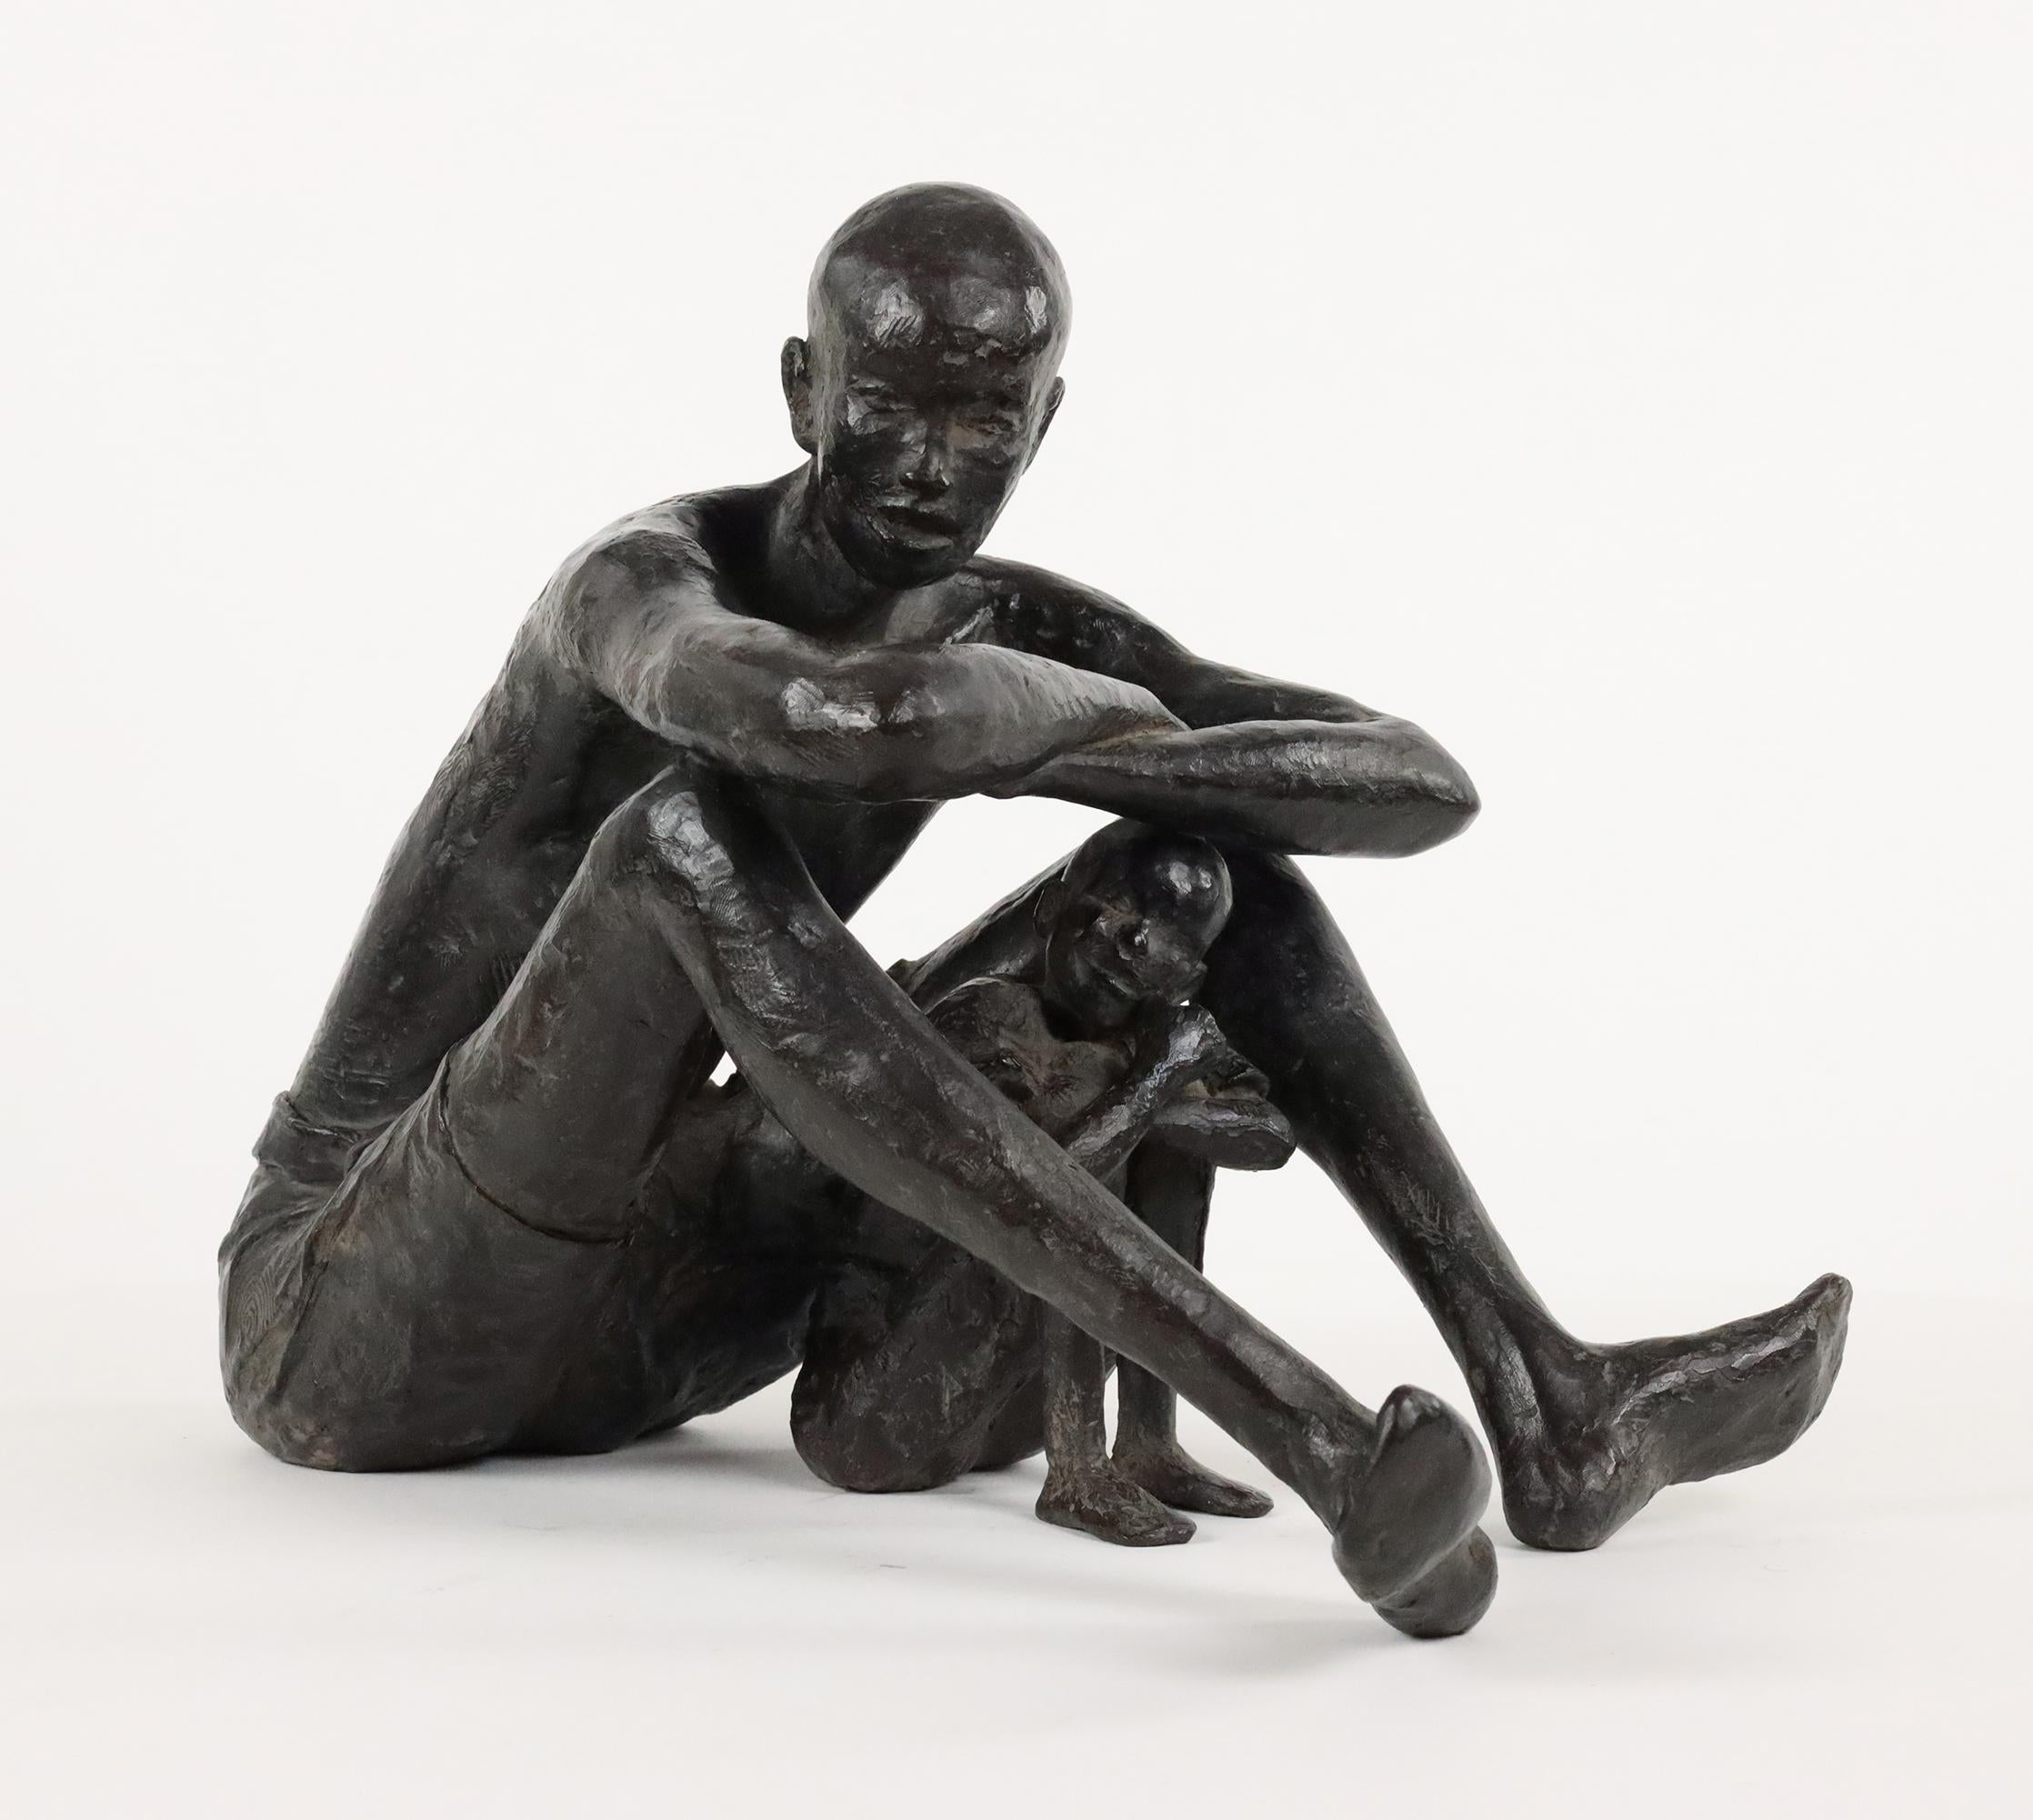 In the shadow of being loved is a bronze sculpture by French contemporary artist Marine de Soos, dimensions are 32.5 × 25.5 × 39.5 cm (12.8 × 10 × 15.6 in). 
The sculpture is signed and numbered, it is part of a limited edition of 8 editions + 4